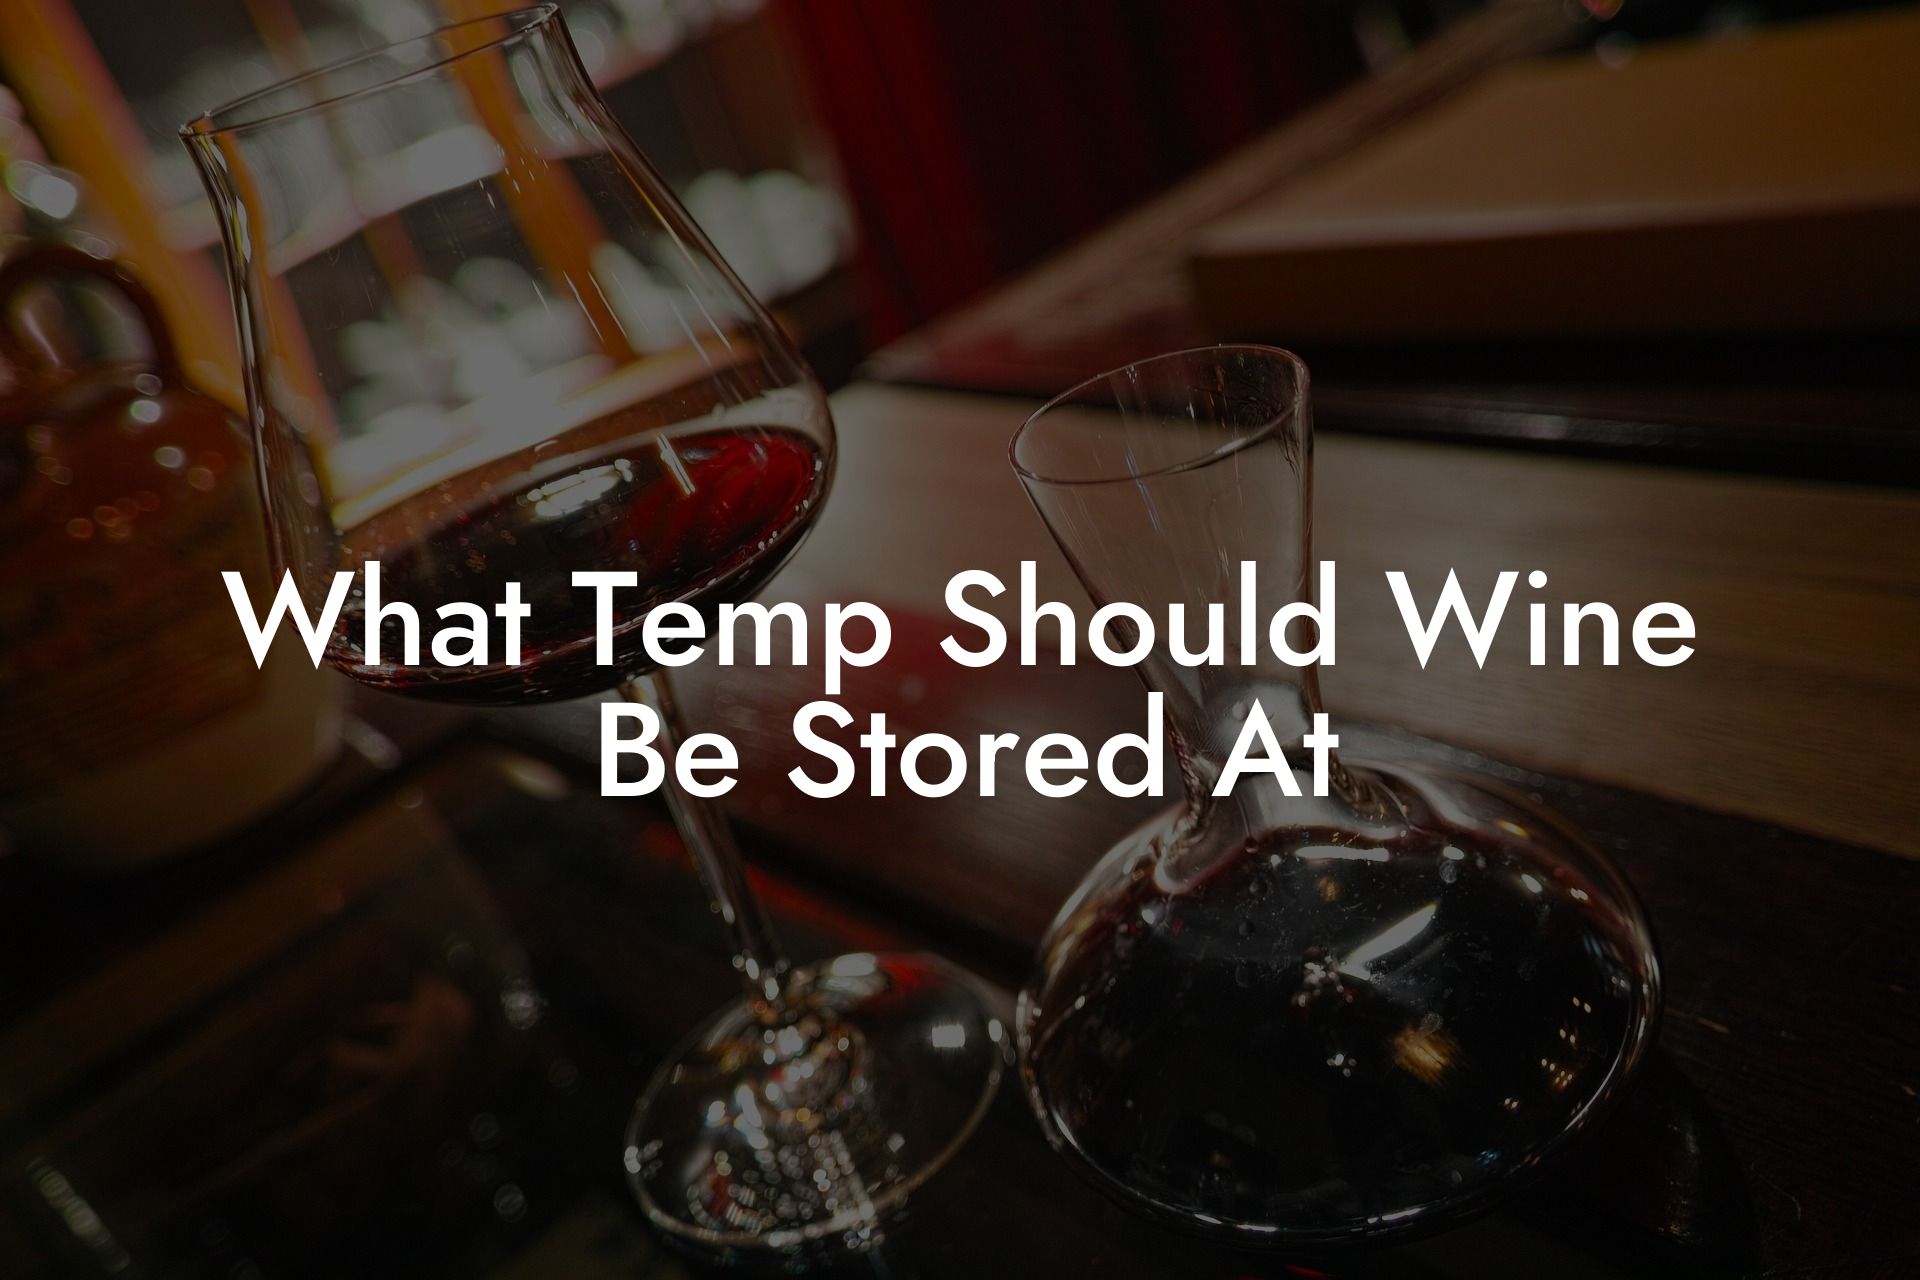 What Temp Should Wine Be Stored At